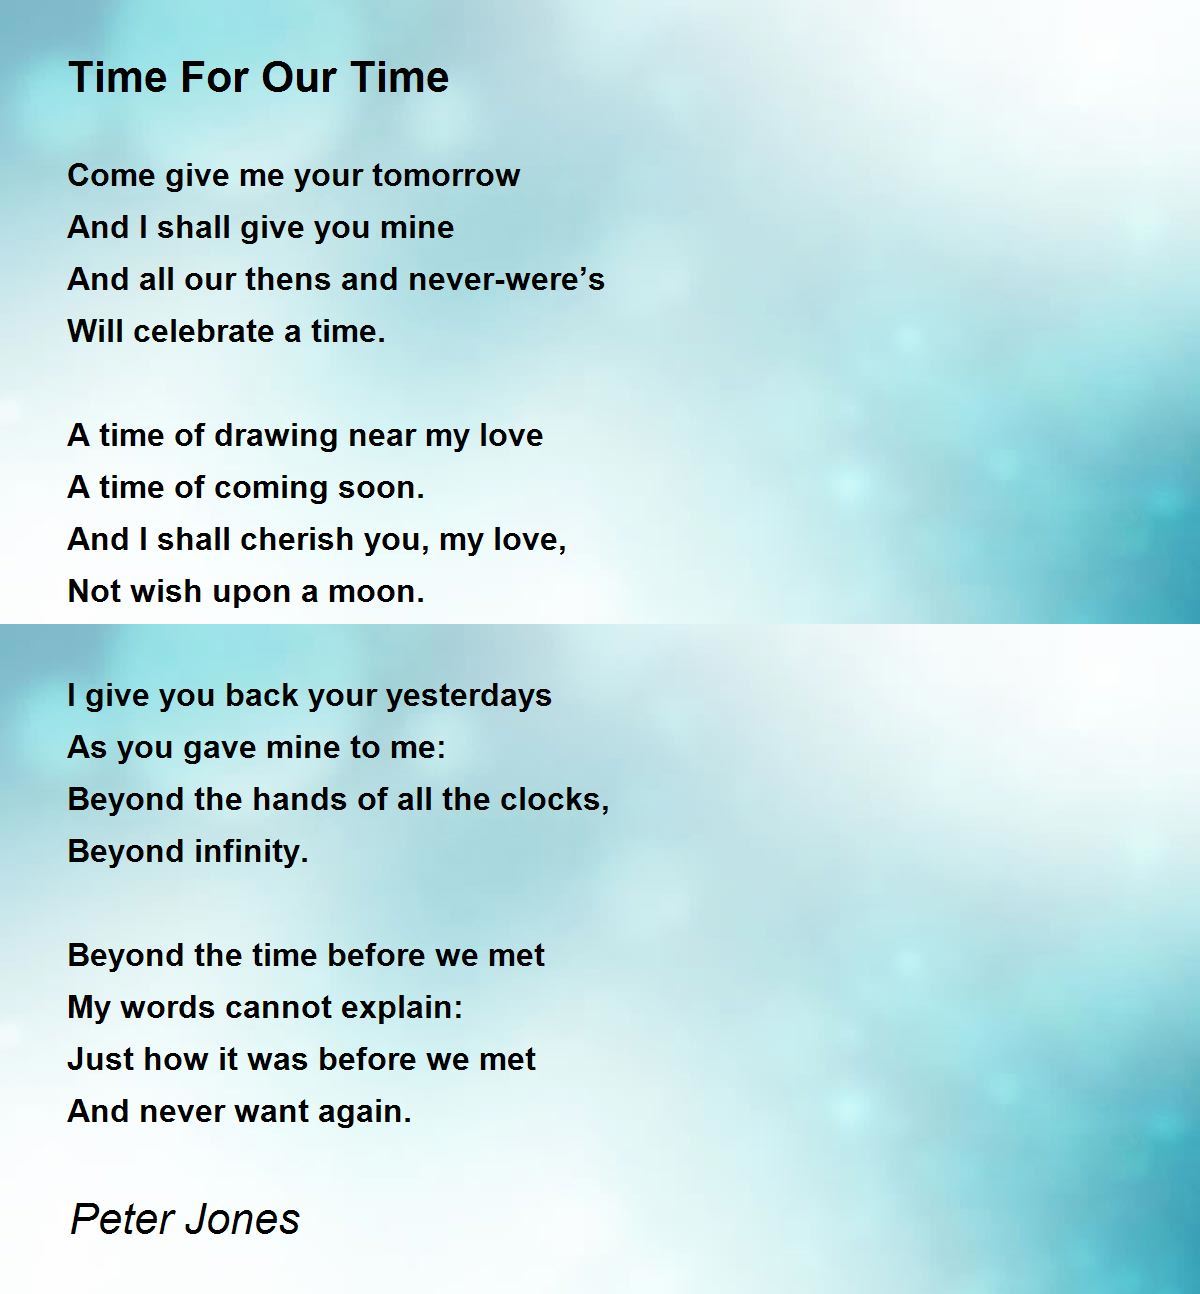 Time For Our Time - Time For Our Time Poem by Peter Jones